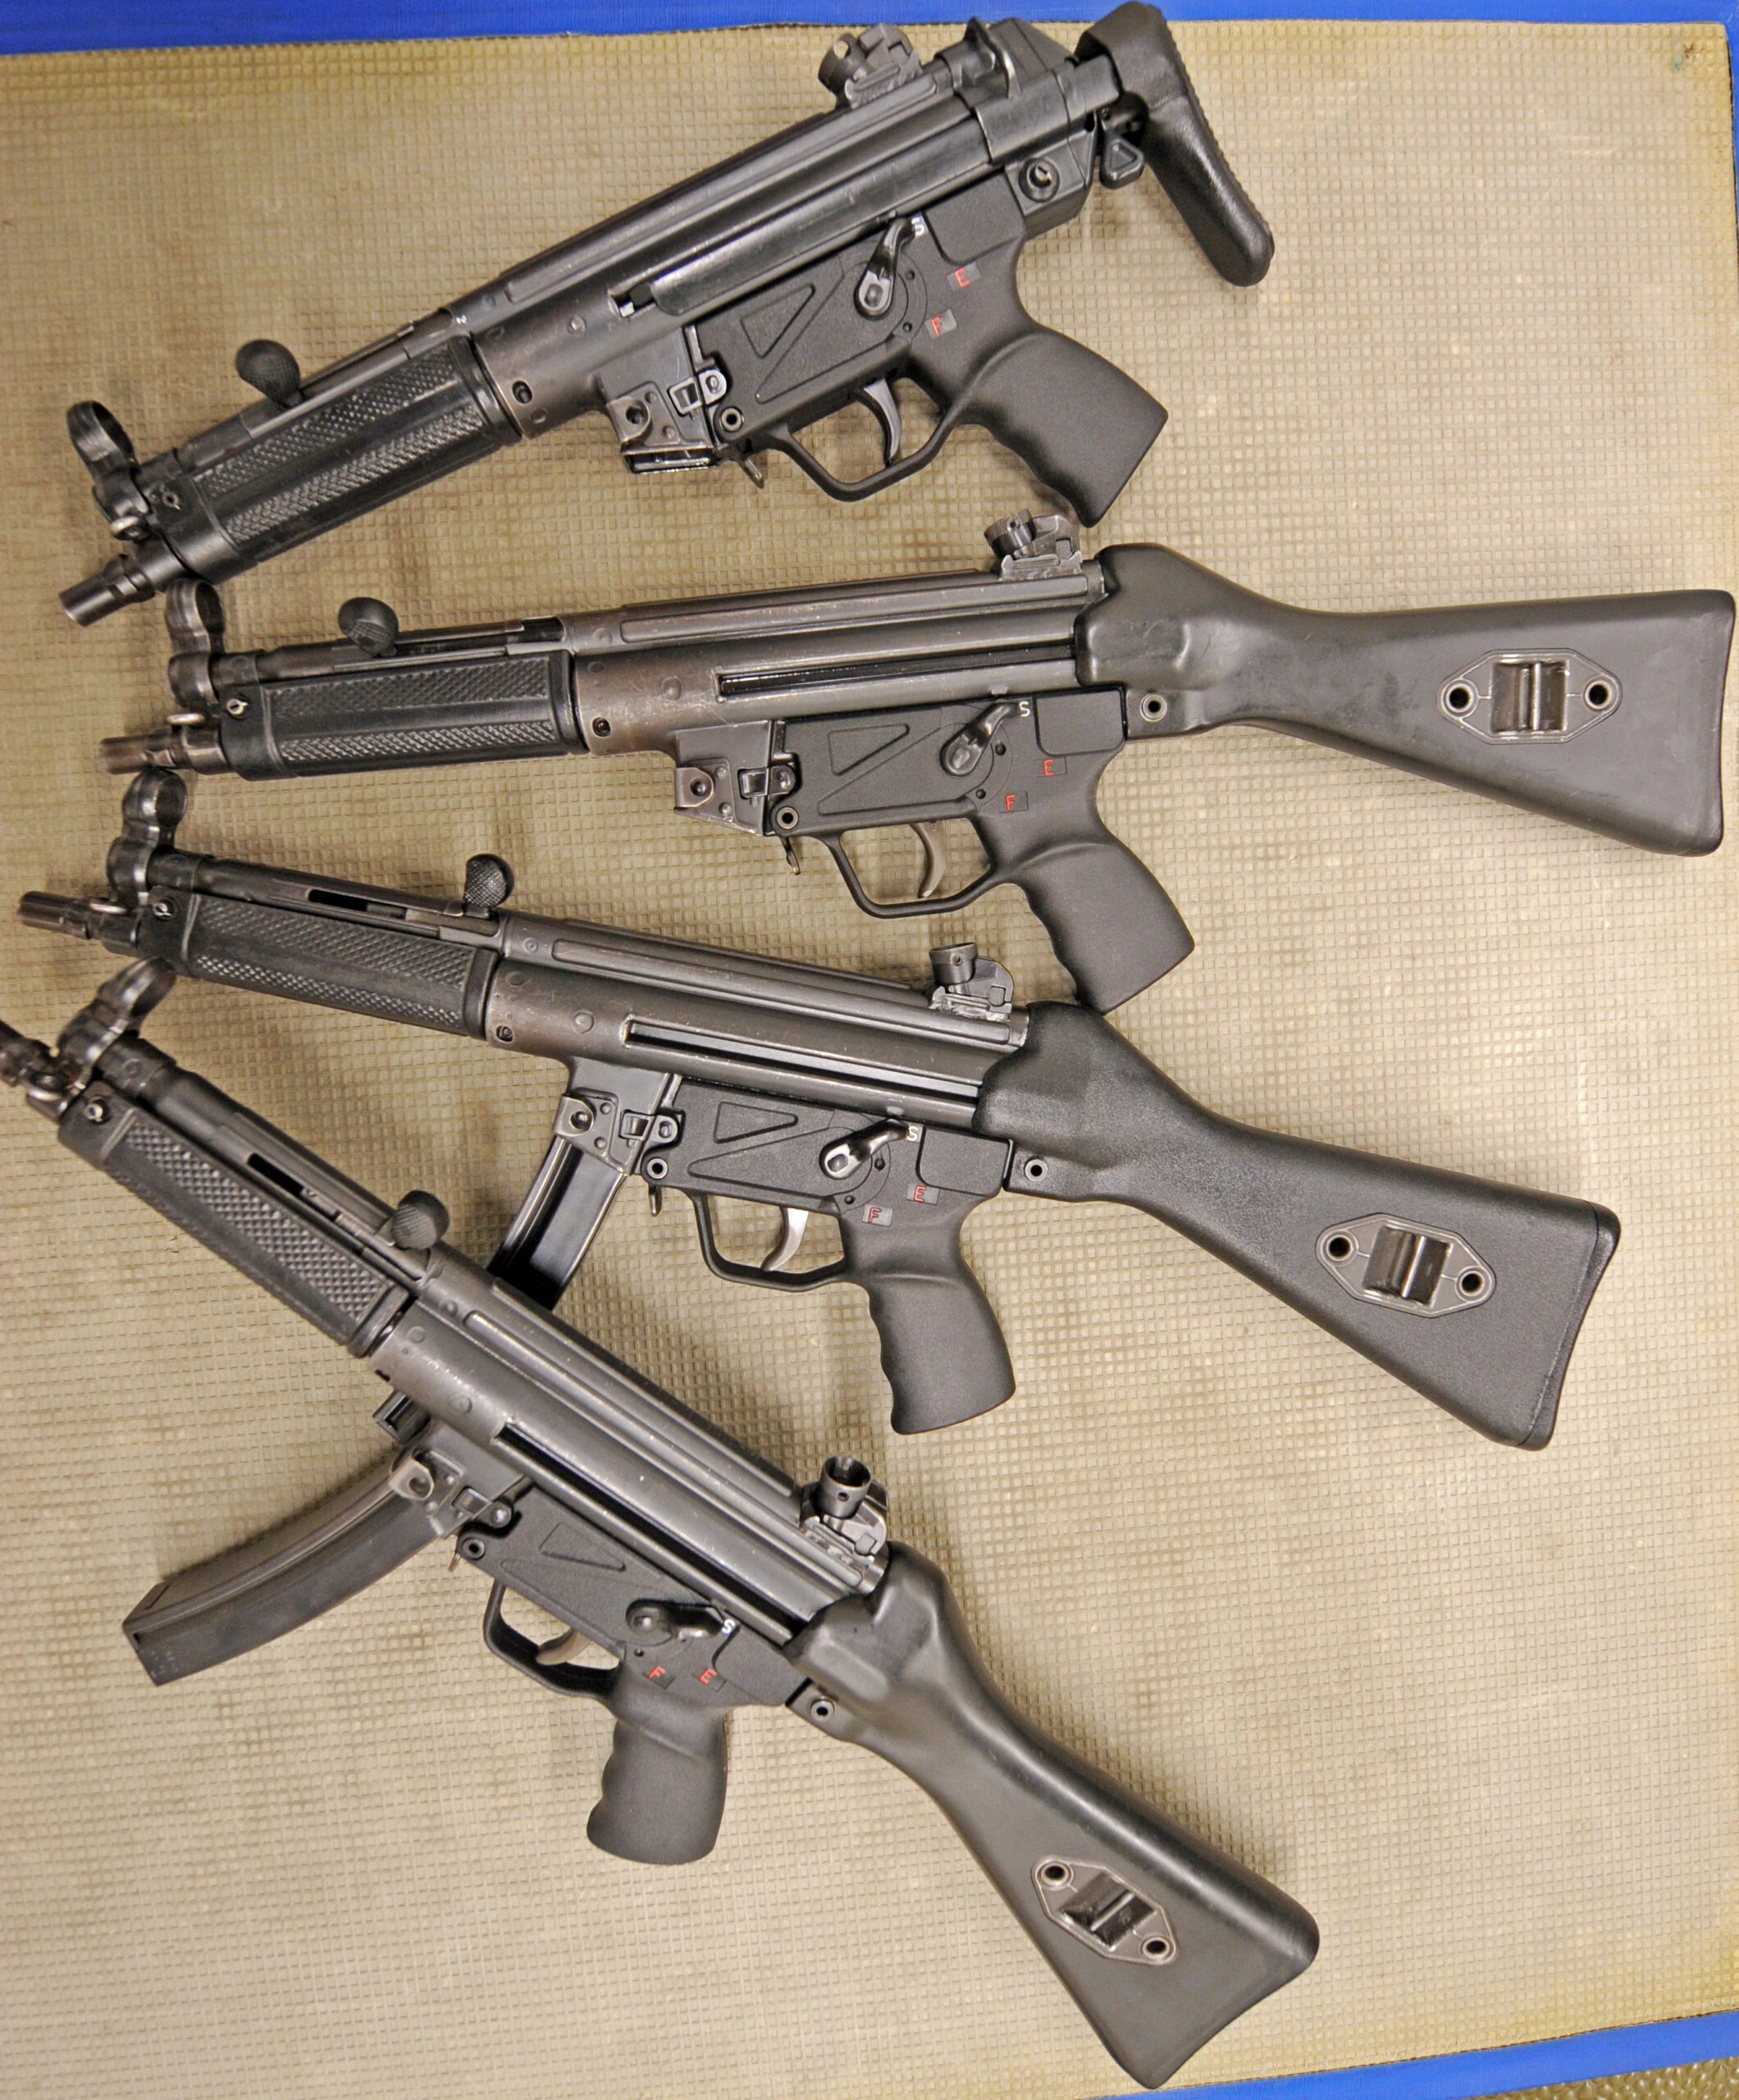 FILE - A file photo dated 15 March 2010 shows machine pistols MP5 made by German weapon manufacturer Heckler & Koch at the police shooting range in Freiburg, Germany, 15 March 2010. According to reports by peace activists, these weapons were delivered to the Egyptian police in the past. Egpyt has received deliveries of tank part, submarine material and machine pistols for years. The German government has now stopped these exports because of the unrest and orders aren't being filled anymore. Photo by: Patrick Seeger/picture-alliance/dpa/AP Images